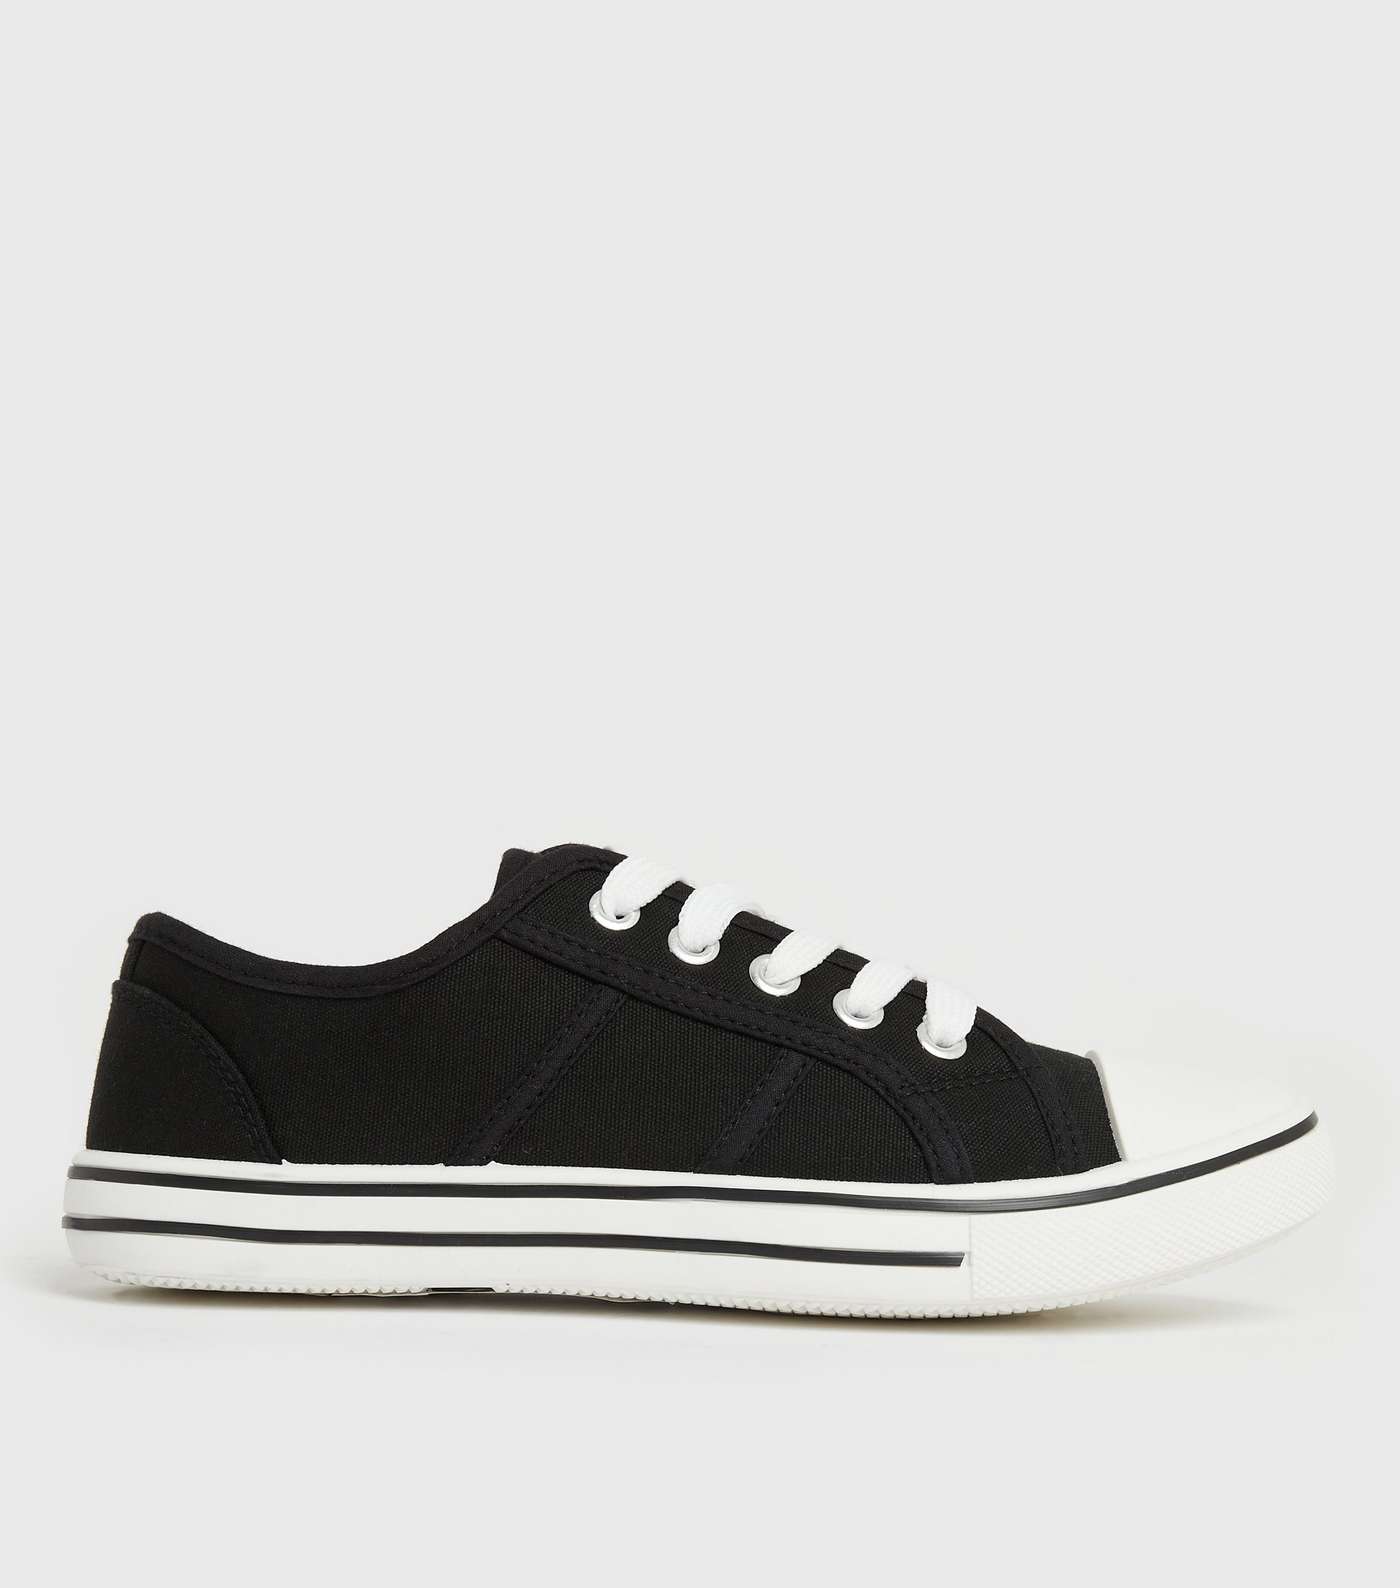 Black Canvas Lace Up Trainers